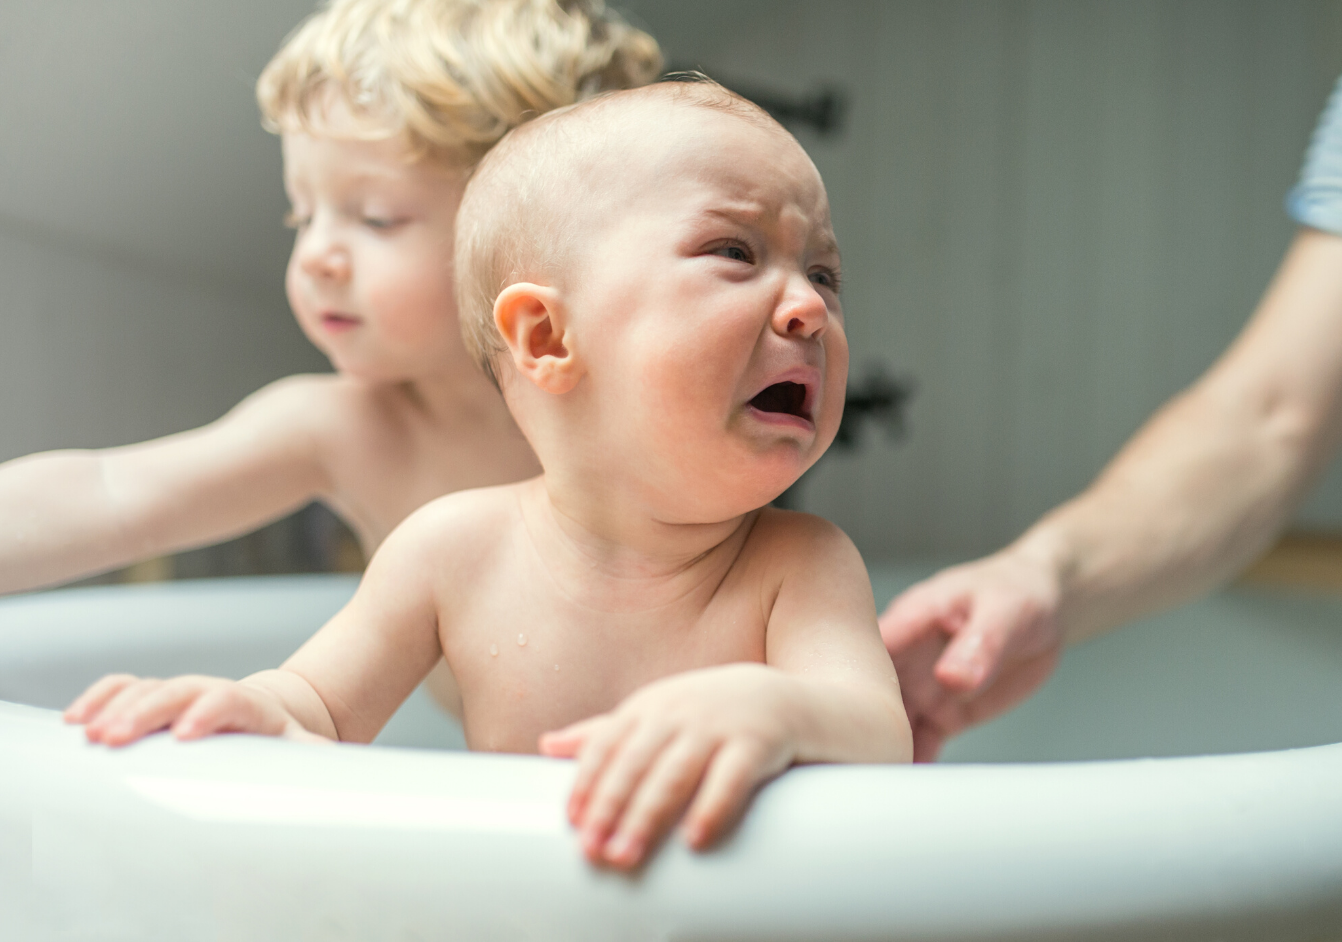 two babies in a bath, one baby is having a tantrum